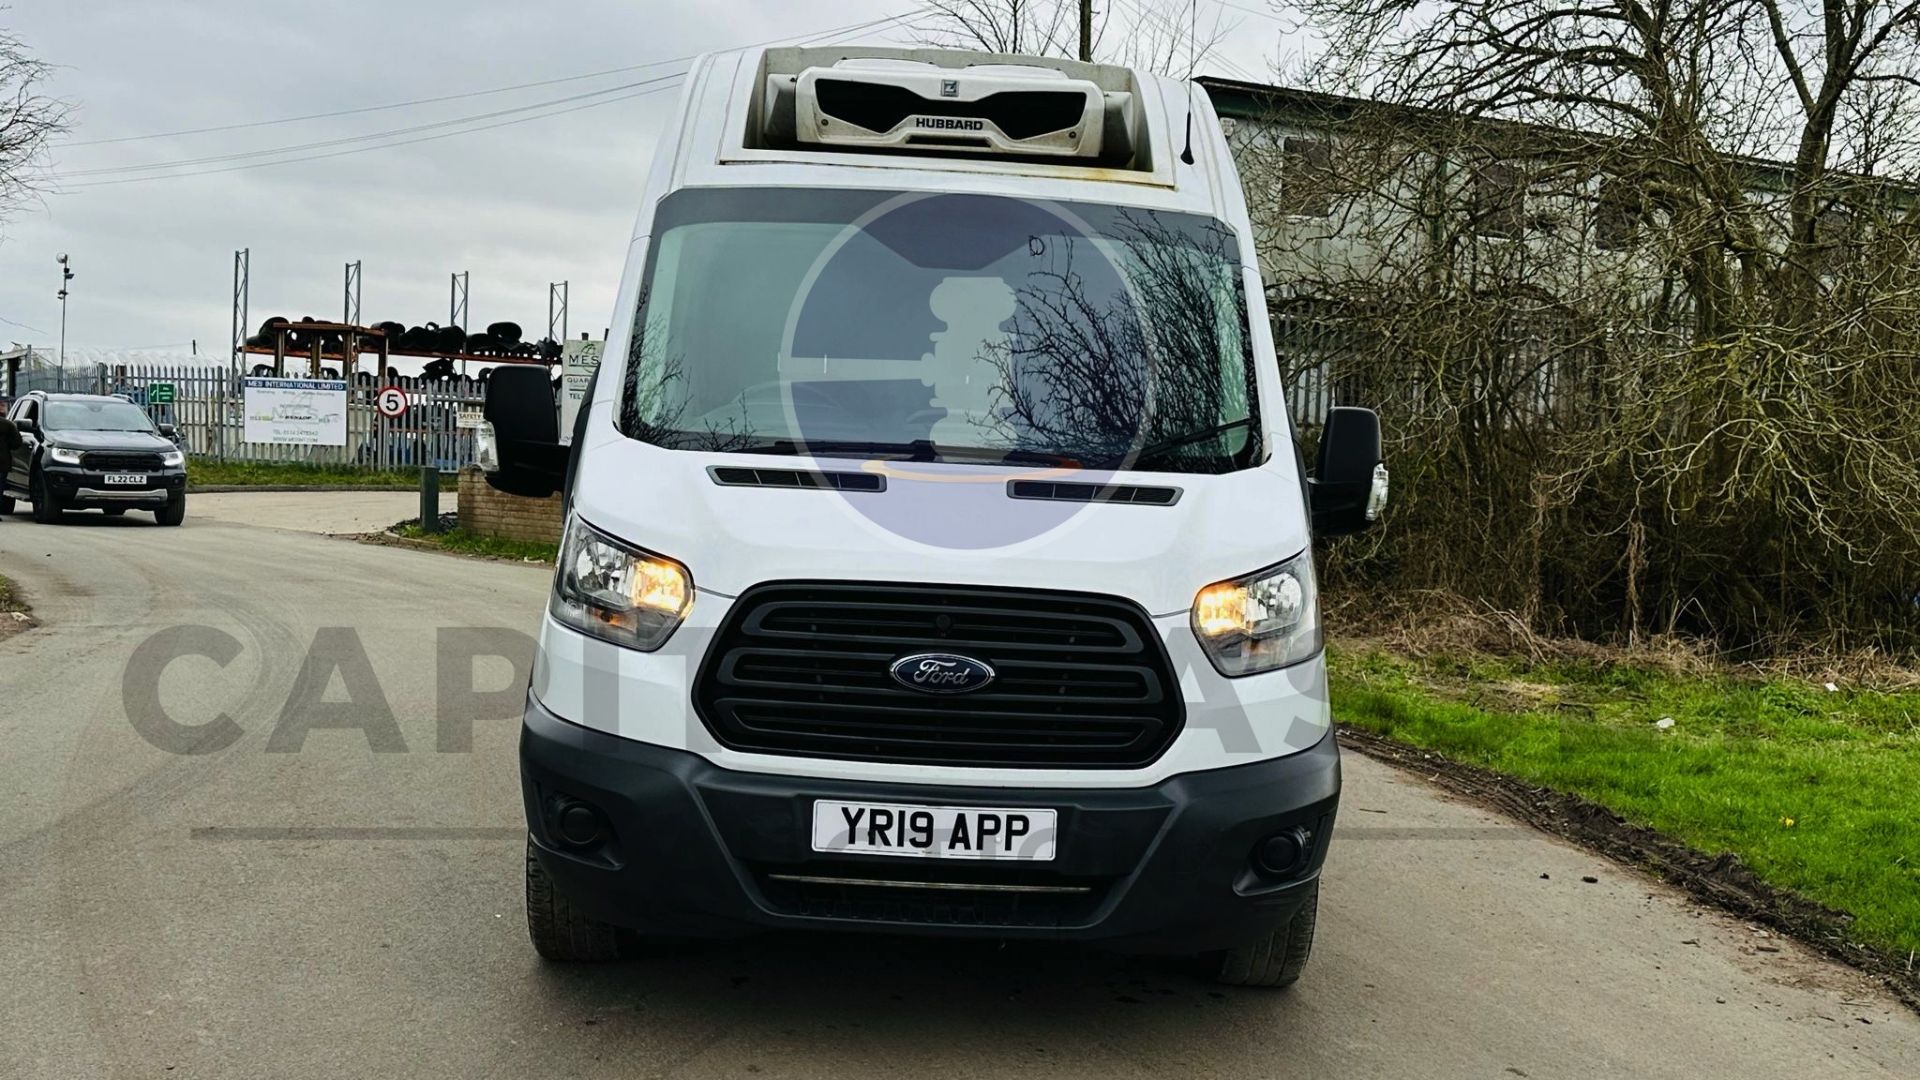 (On Sale) FORD TRANSIT 130 T350 *LWB - REFRIGERATED VAN* (2019 - EURO 6) 2.0 TDCI - 6 SPEED *EURO 6* - Image 5 of 39